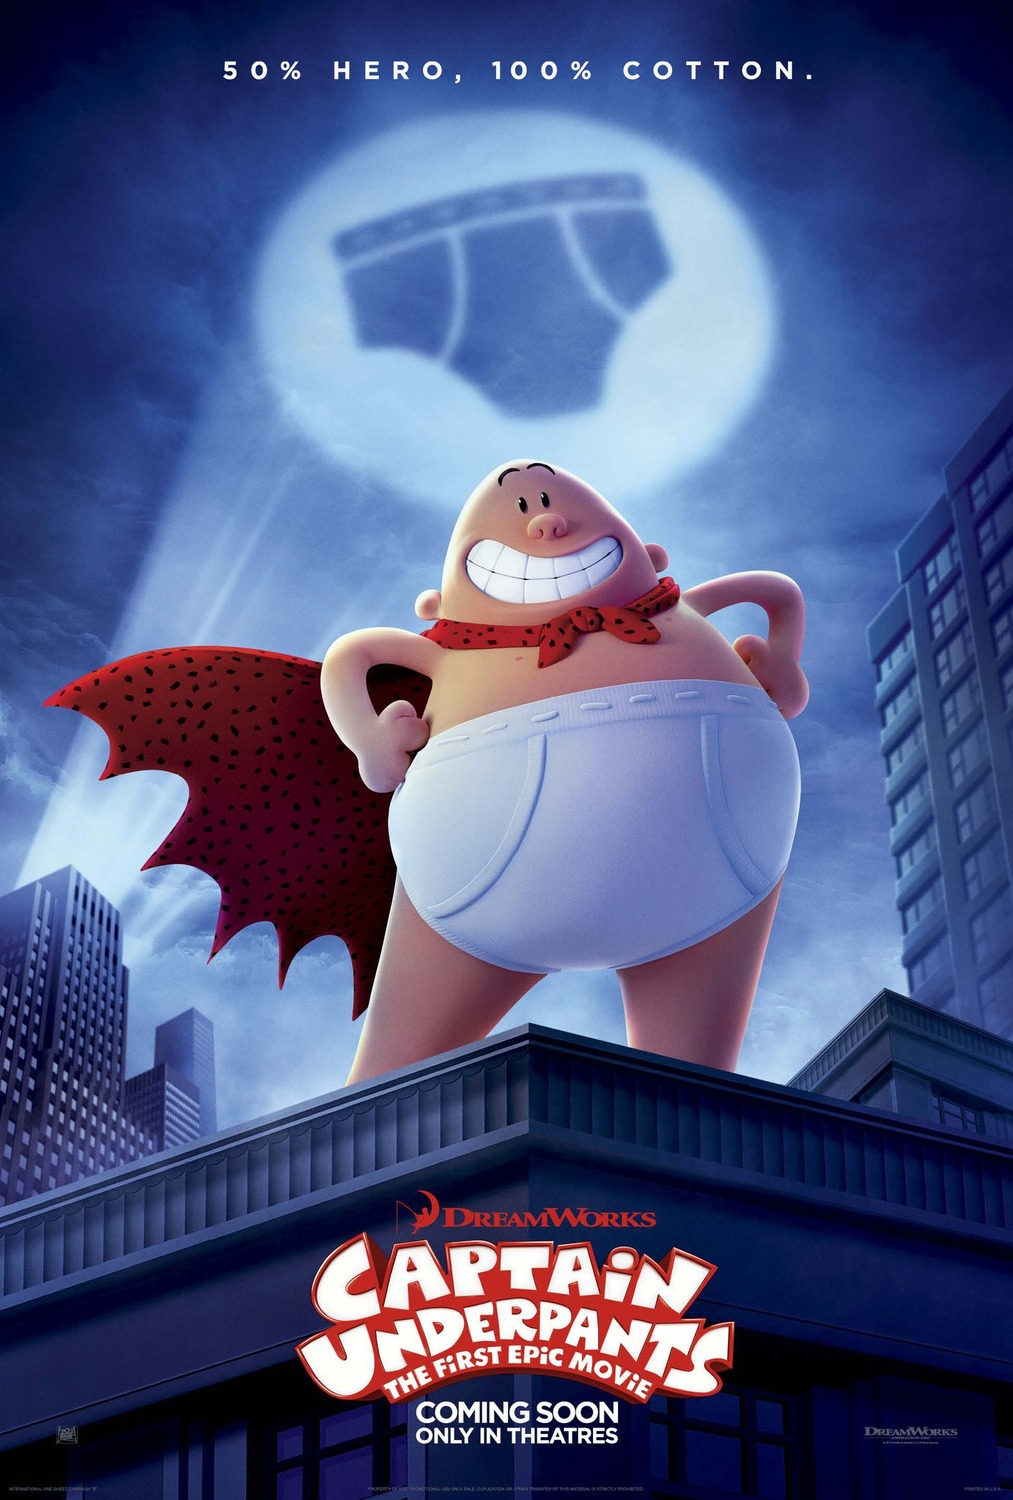 Extra Large Movie Poster Image for Captain Underpants (#2 of 3)